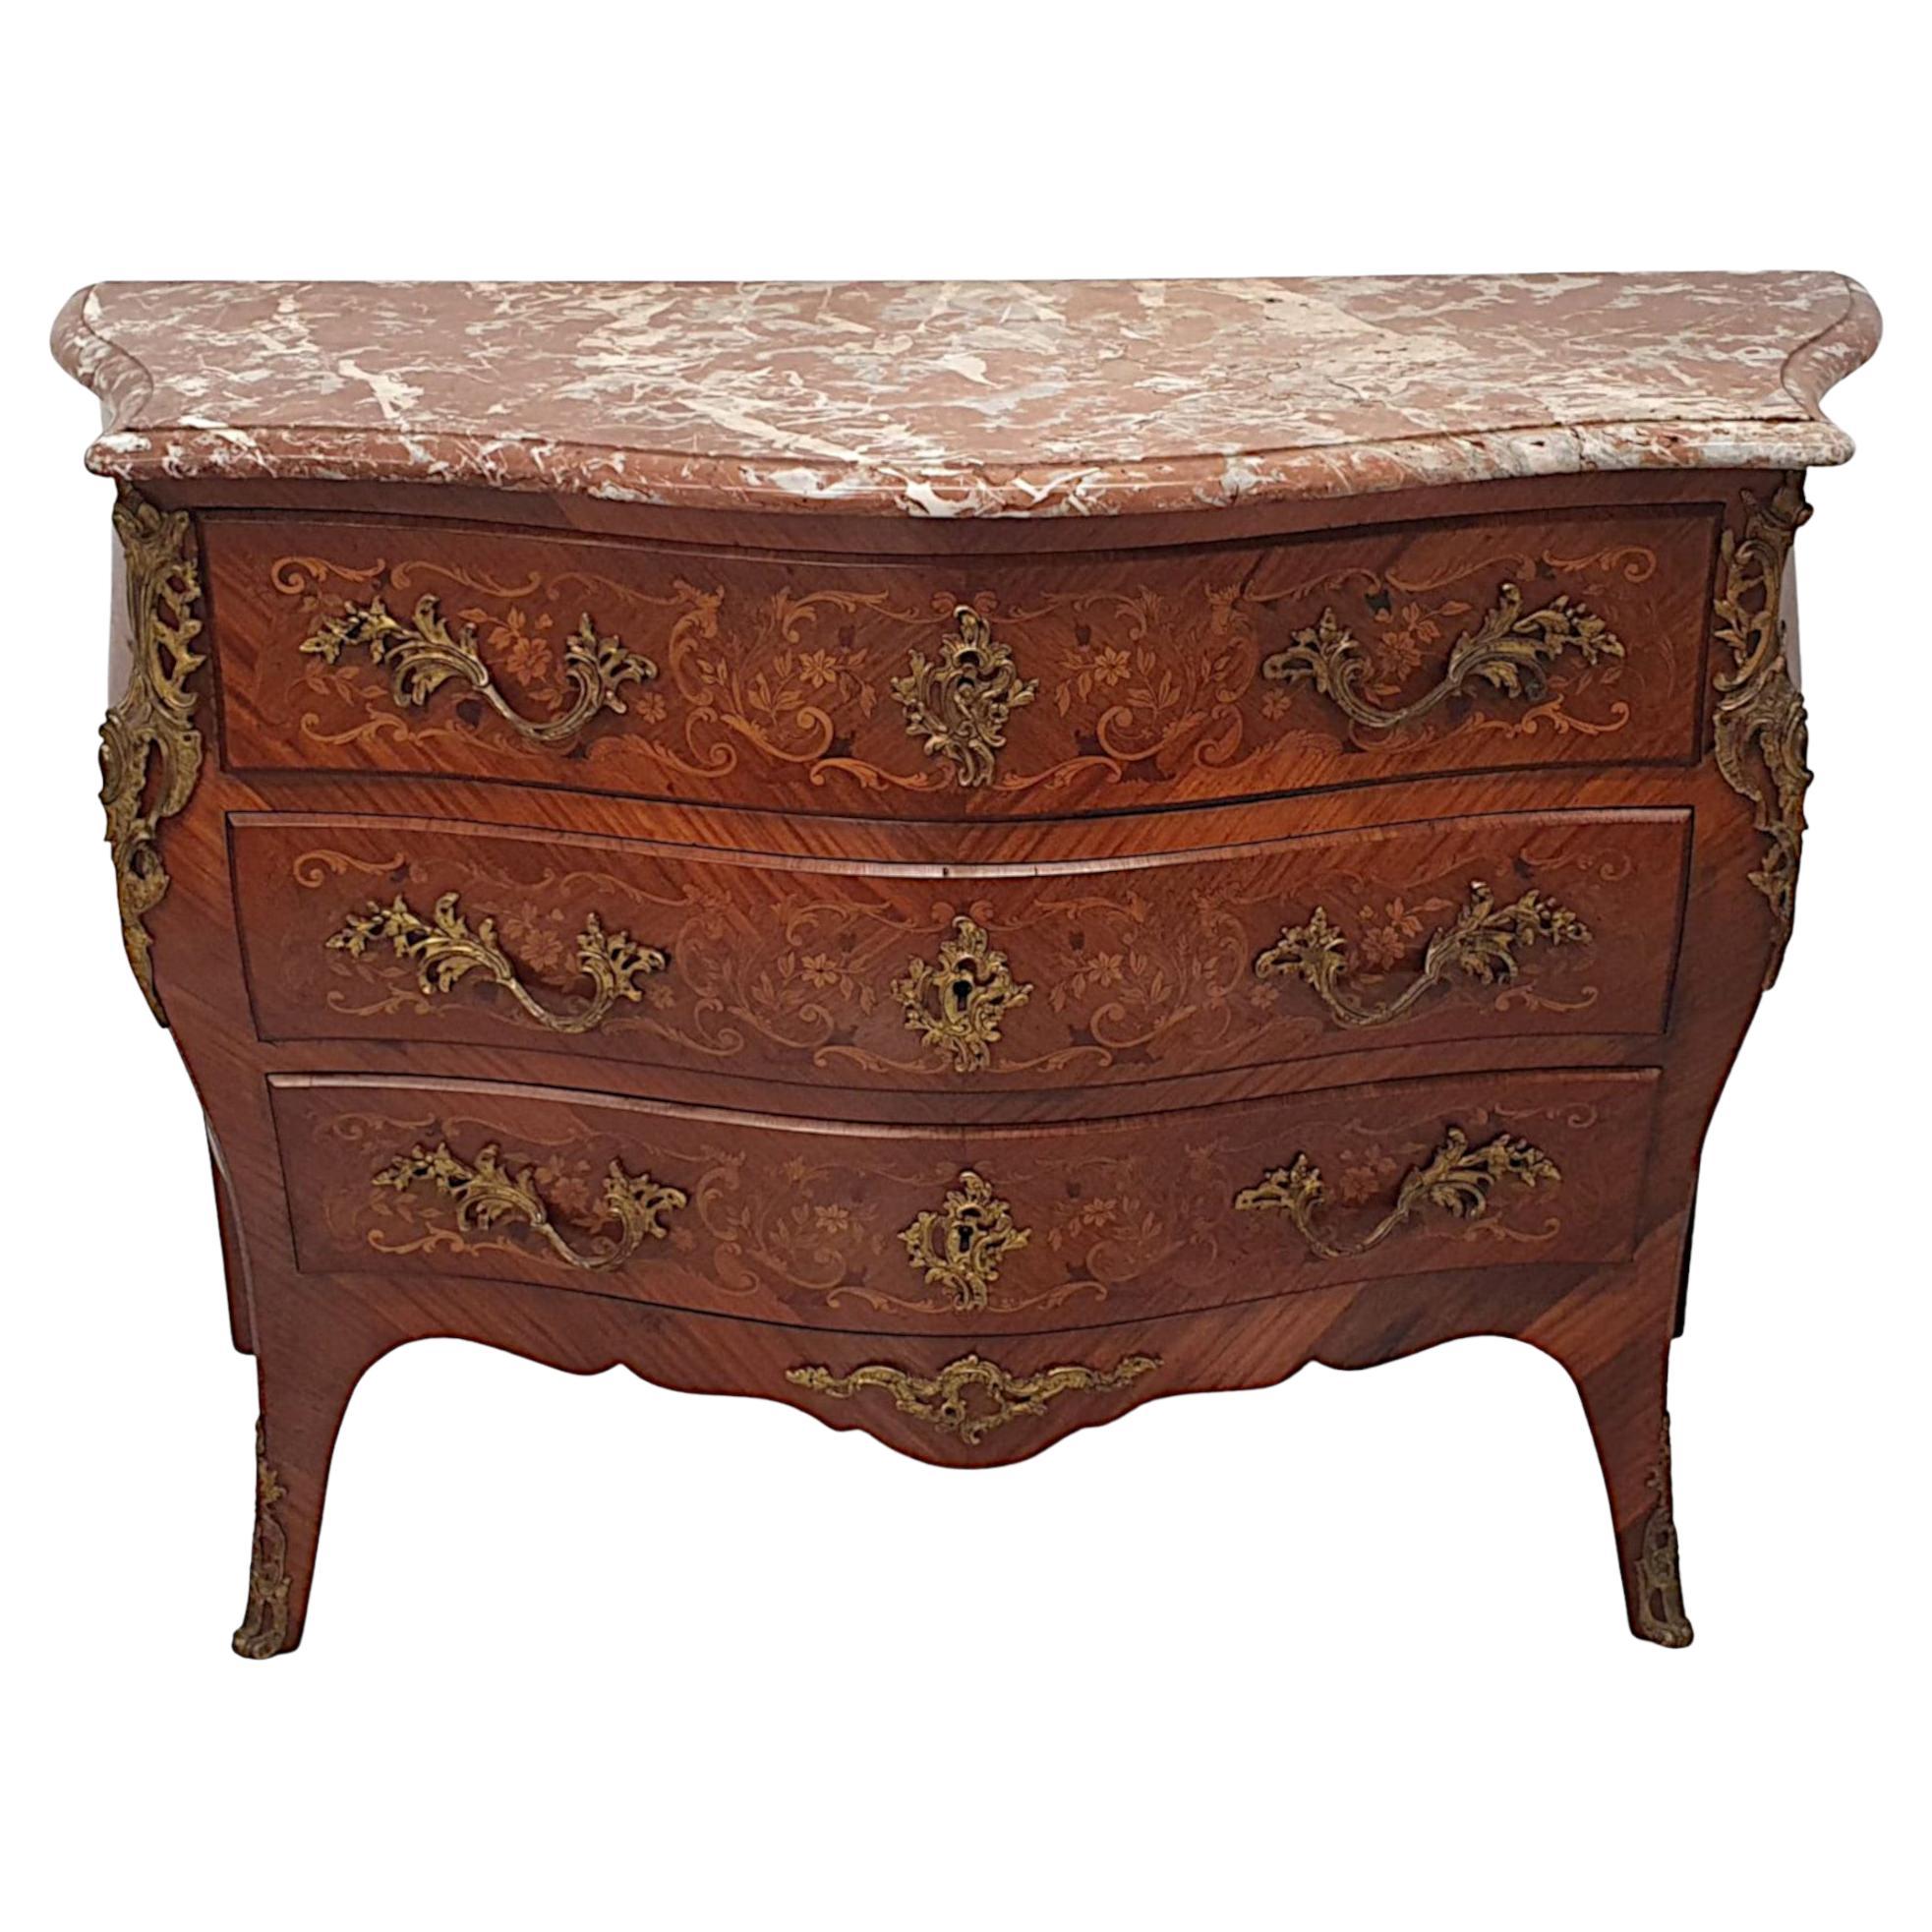 Very Fine 19th Century Marquetry Inlaid Marble Top Chest of Drawers For Sale